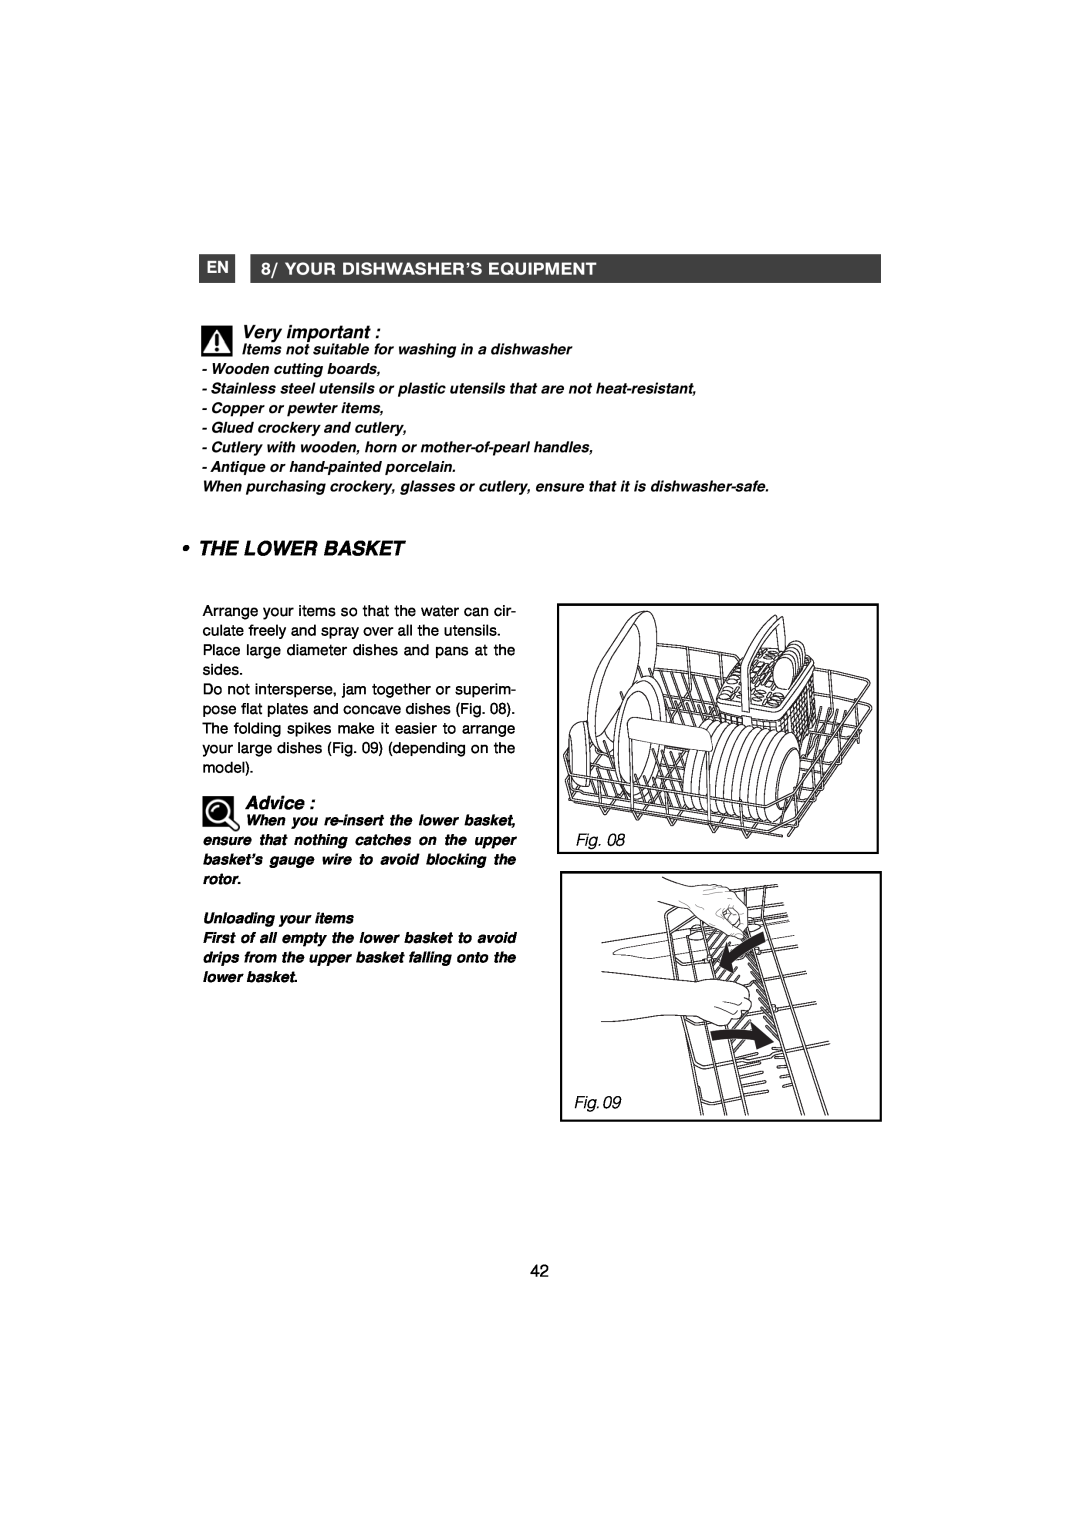 Foster S4000 manual The Lower Basket, Very important, EN 8/ YOUR DISHWASHER’S EQUIPMENT, Advice 